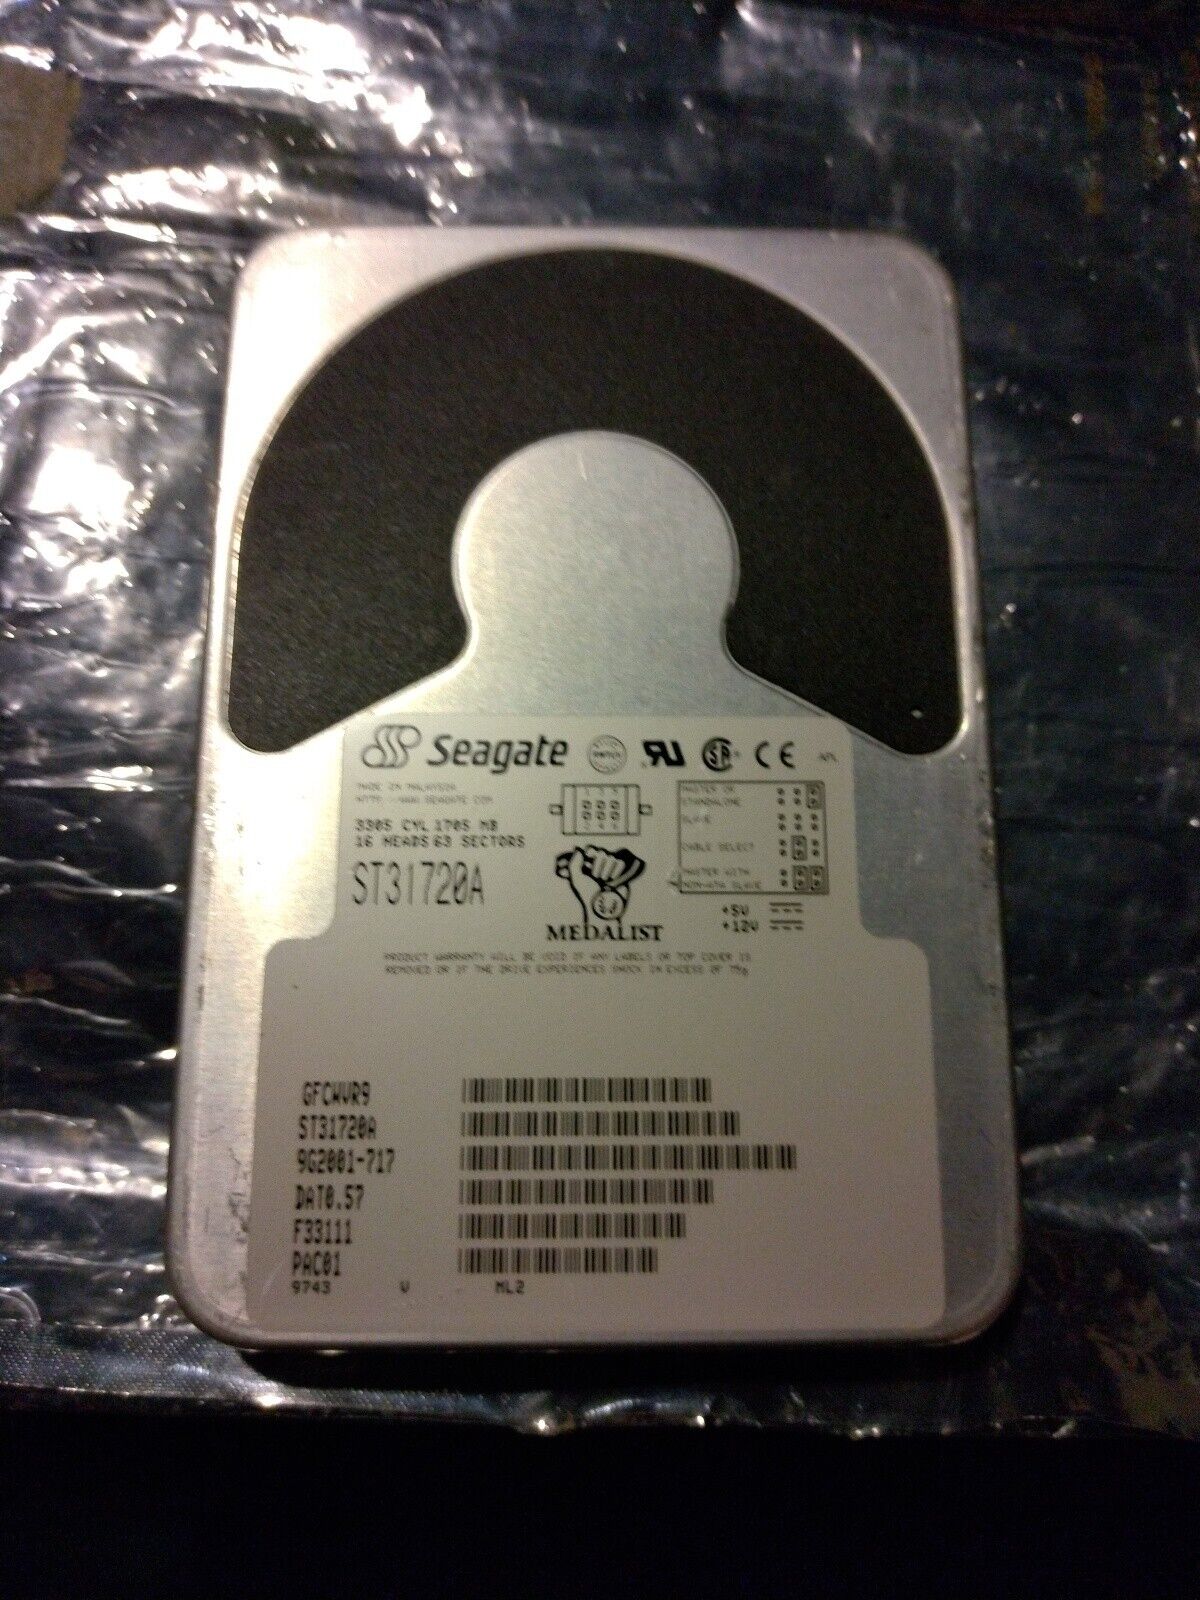 Seagate Medalist ST31720A 9G2001-717 DATO.57 VINTAGE HARD DRIVE